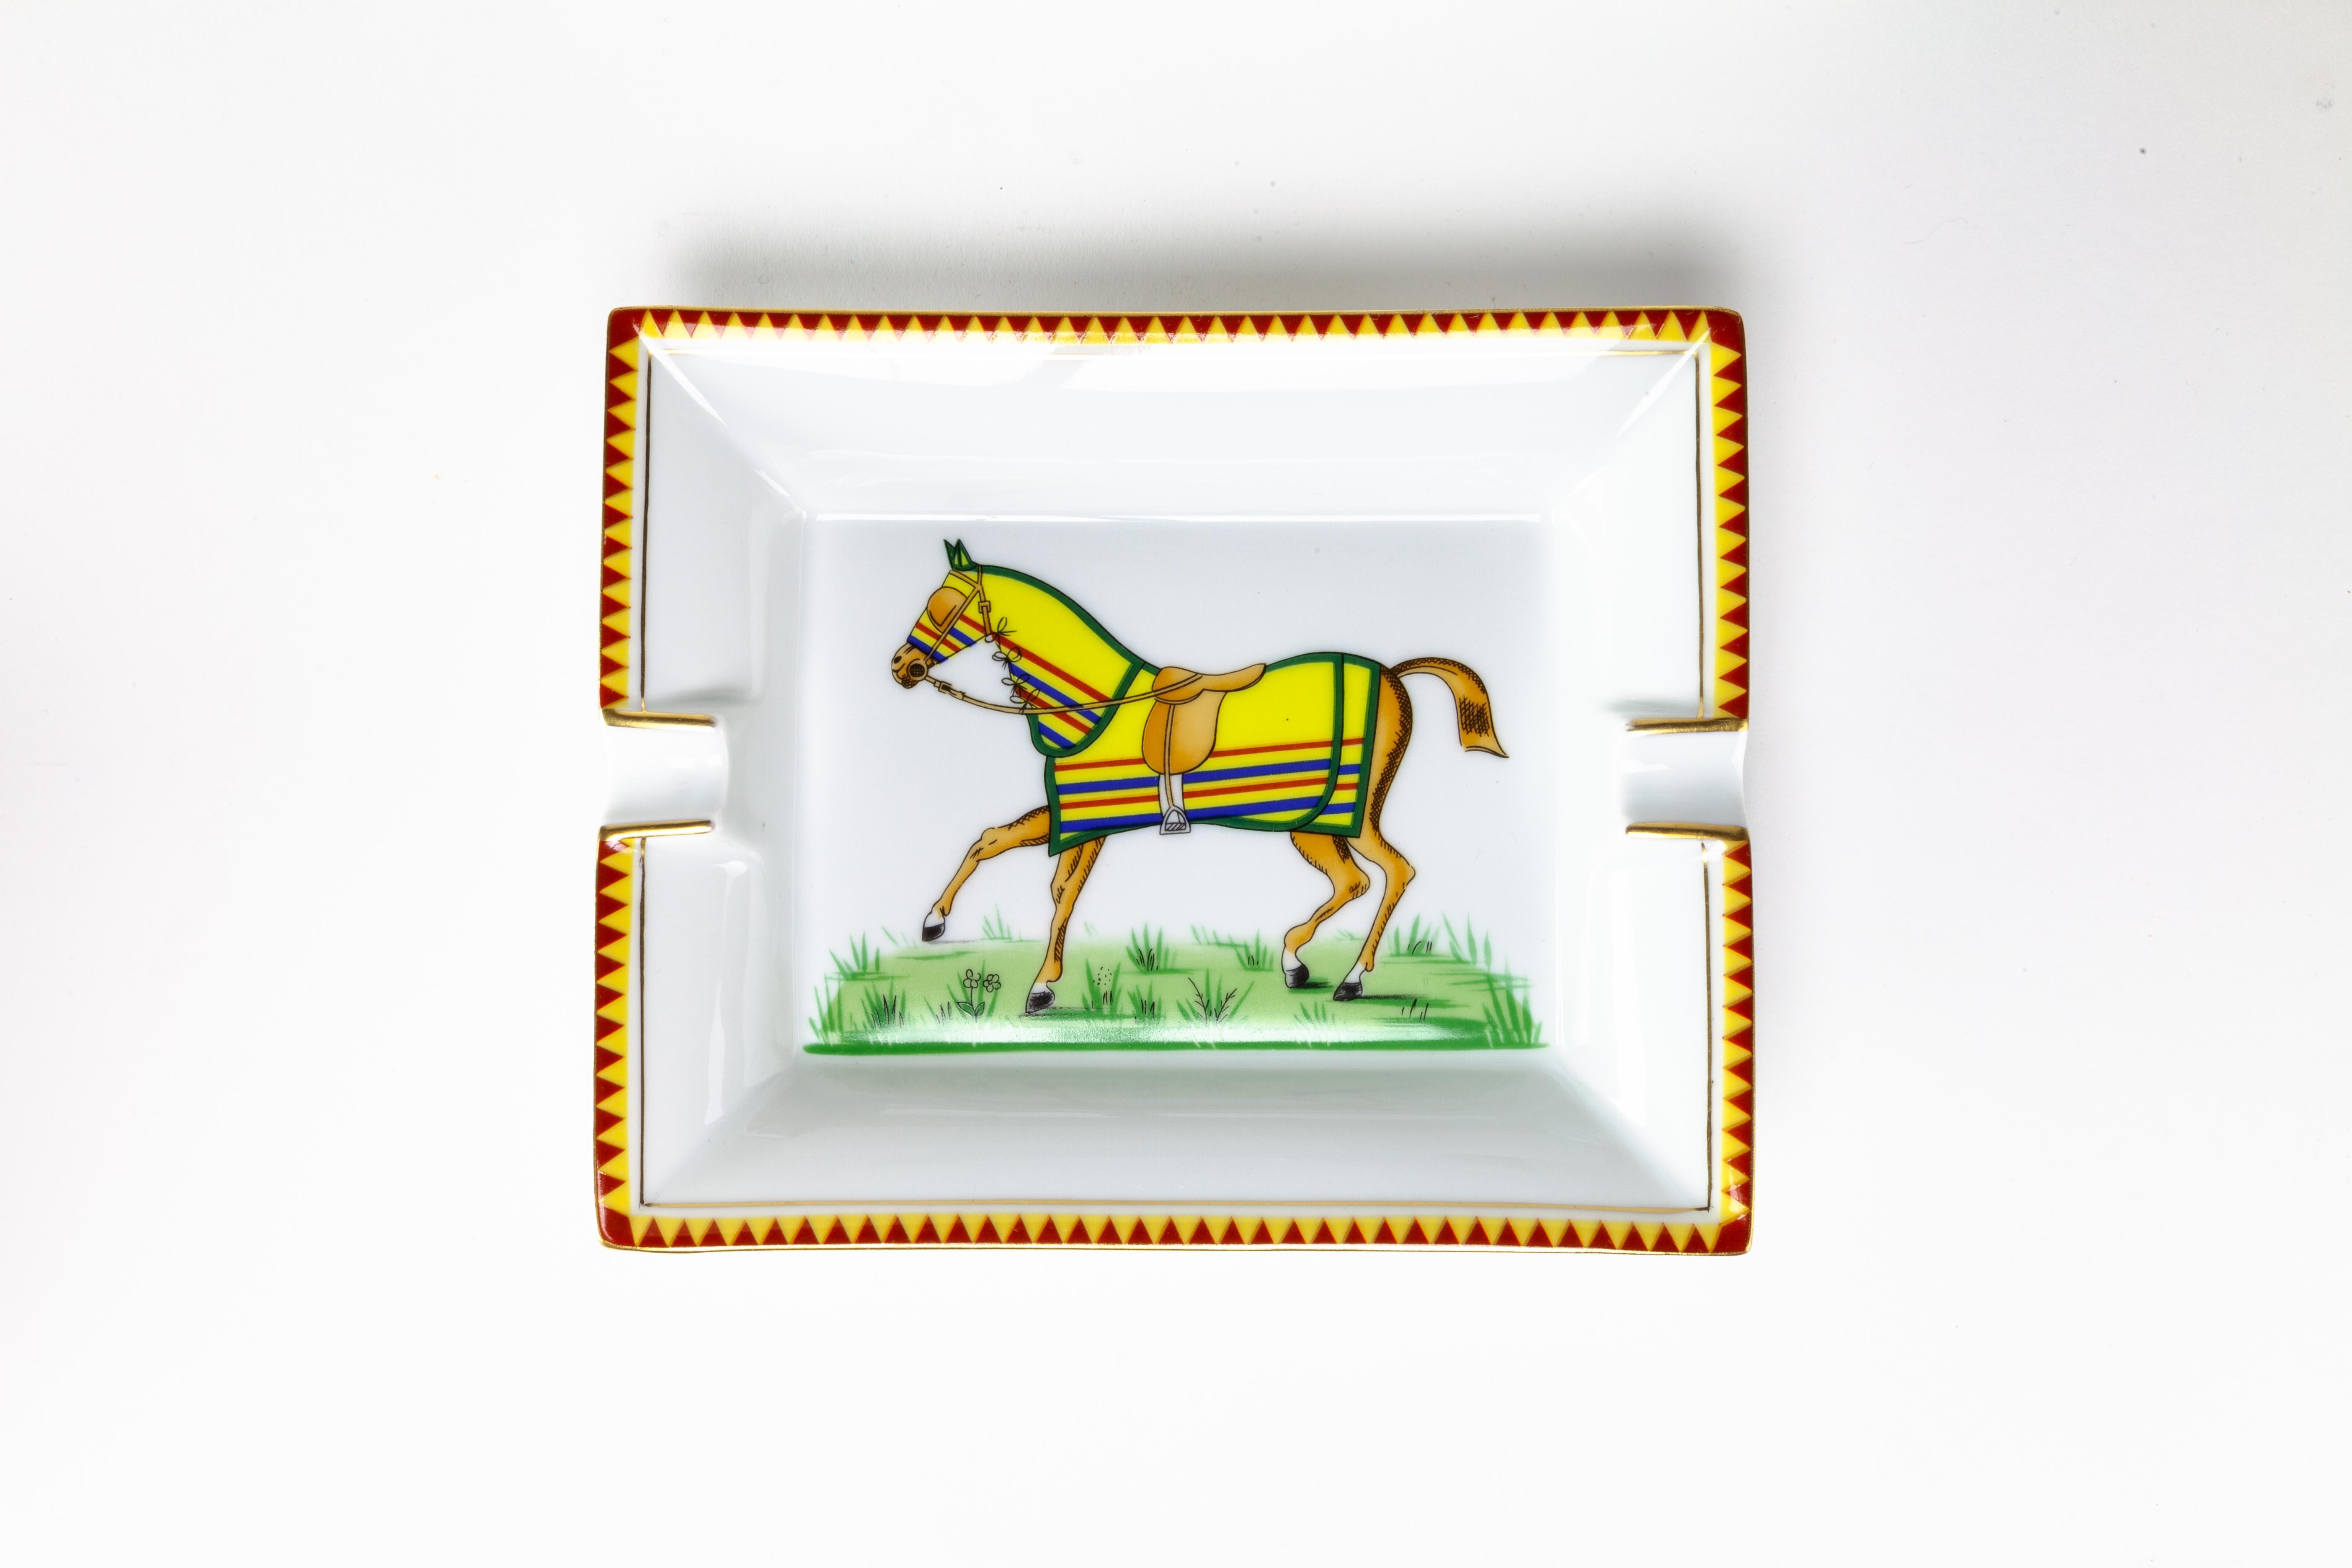 A classic and elegant porcelain ashtray. Featuring a racing horse in a yellow coat.